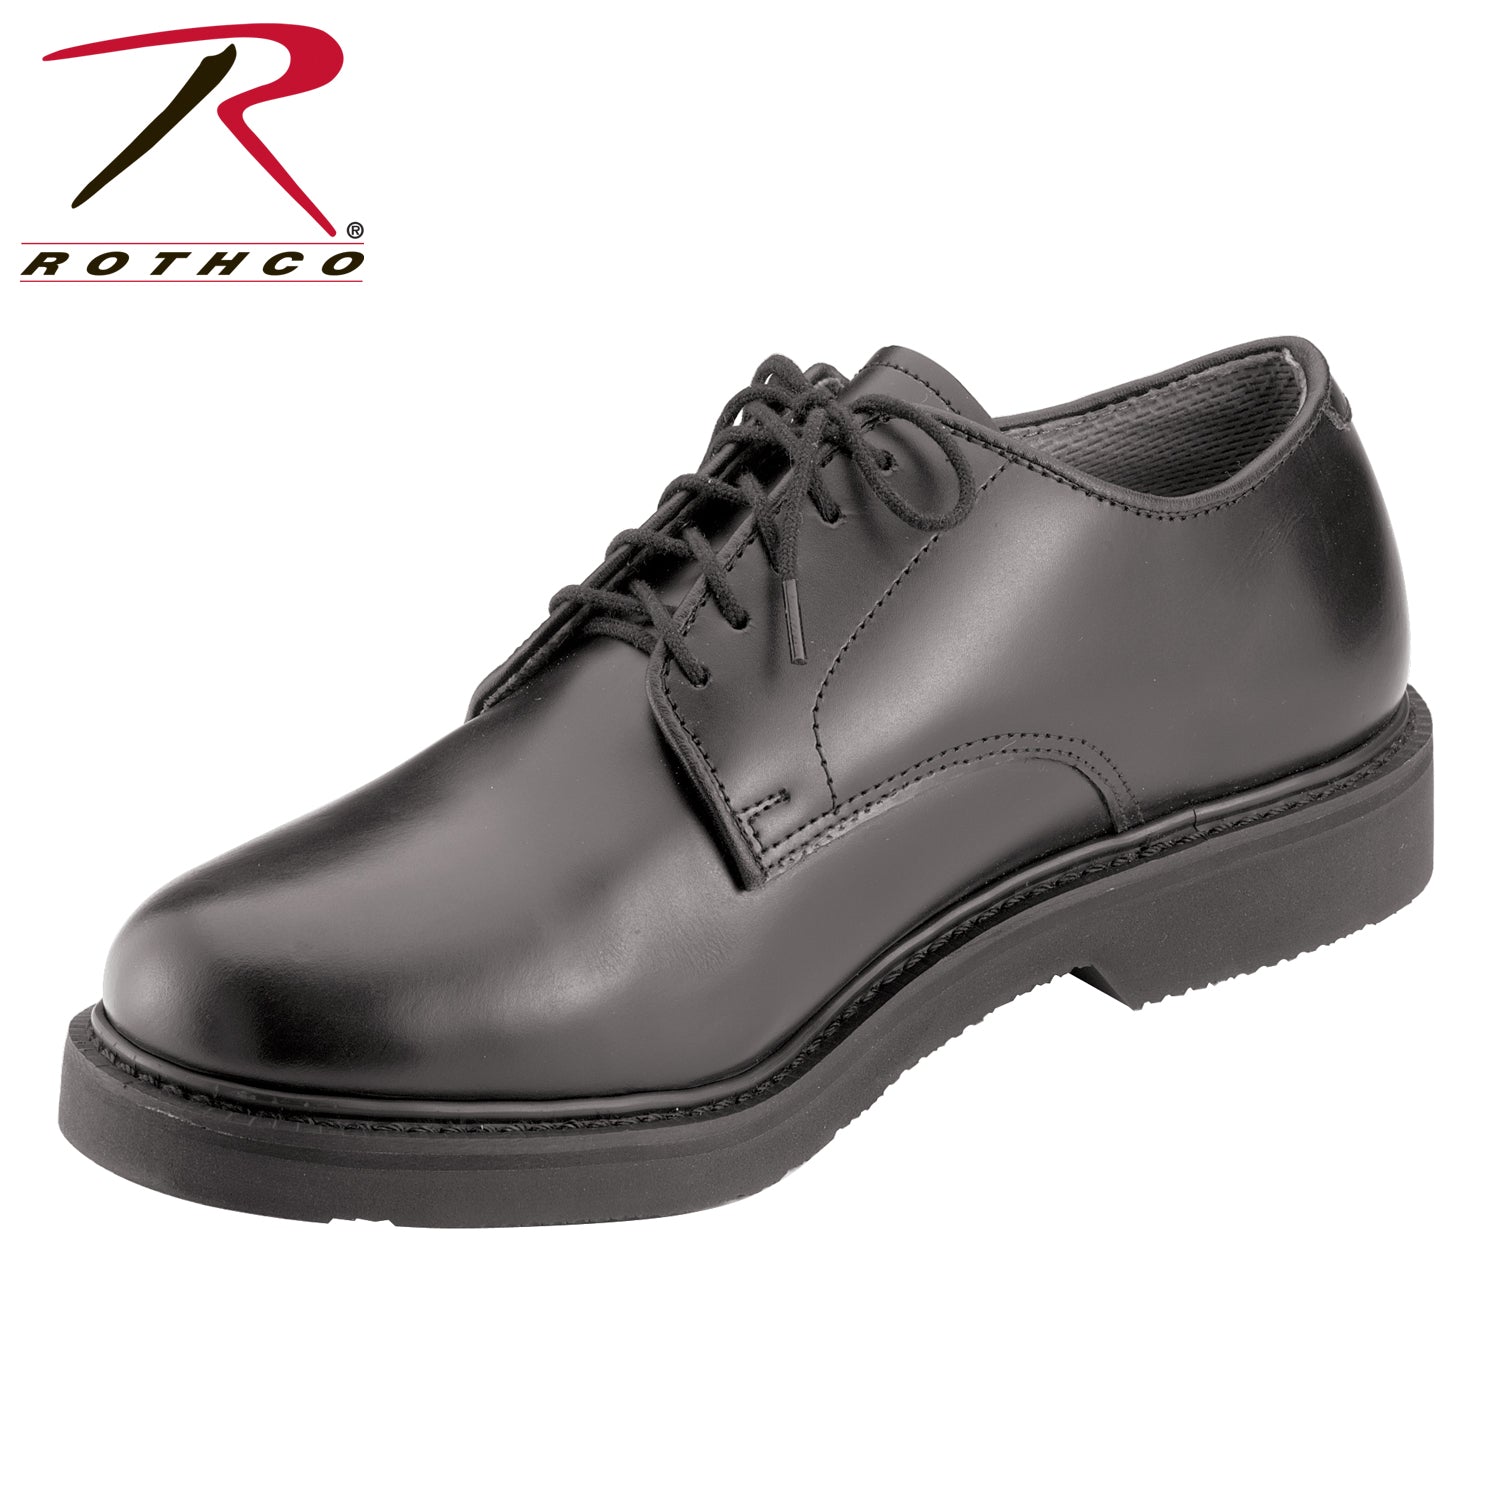 Rothco Military Uniform Oxford Leather Shoes - red-diamond-uniform-police-supply